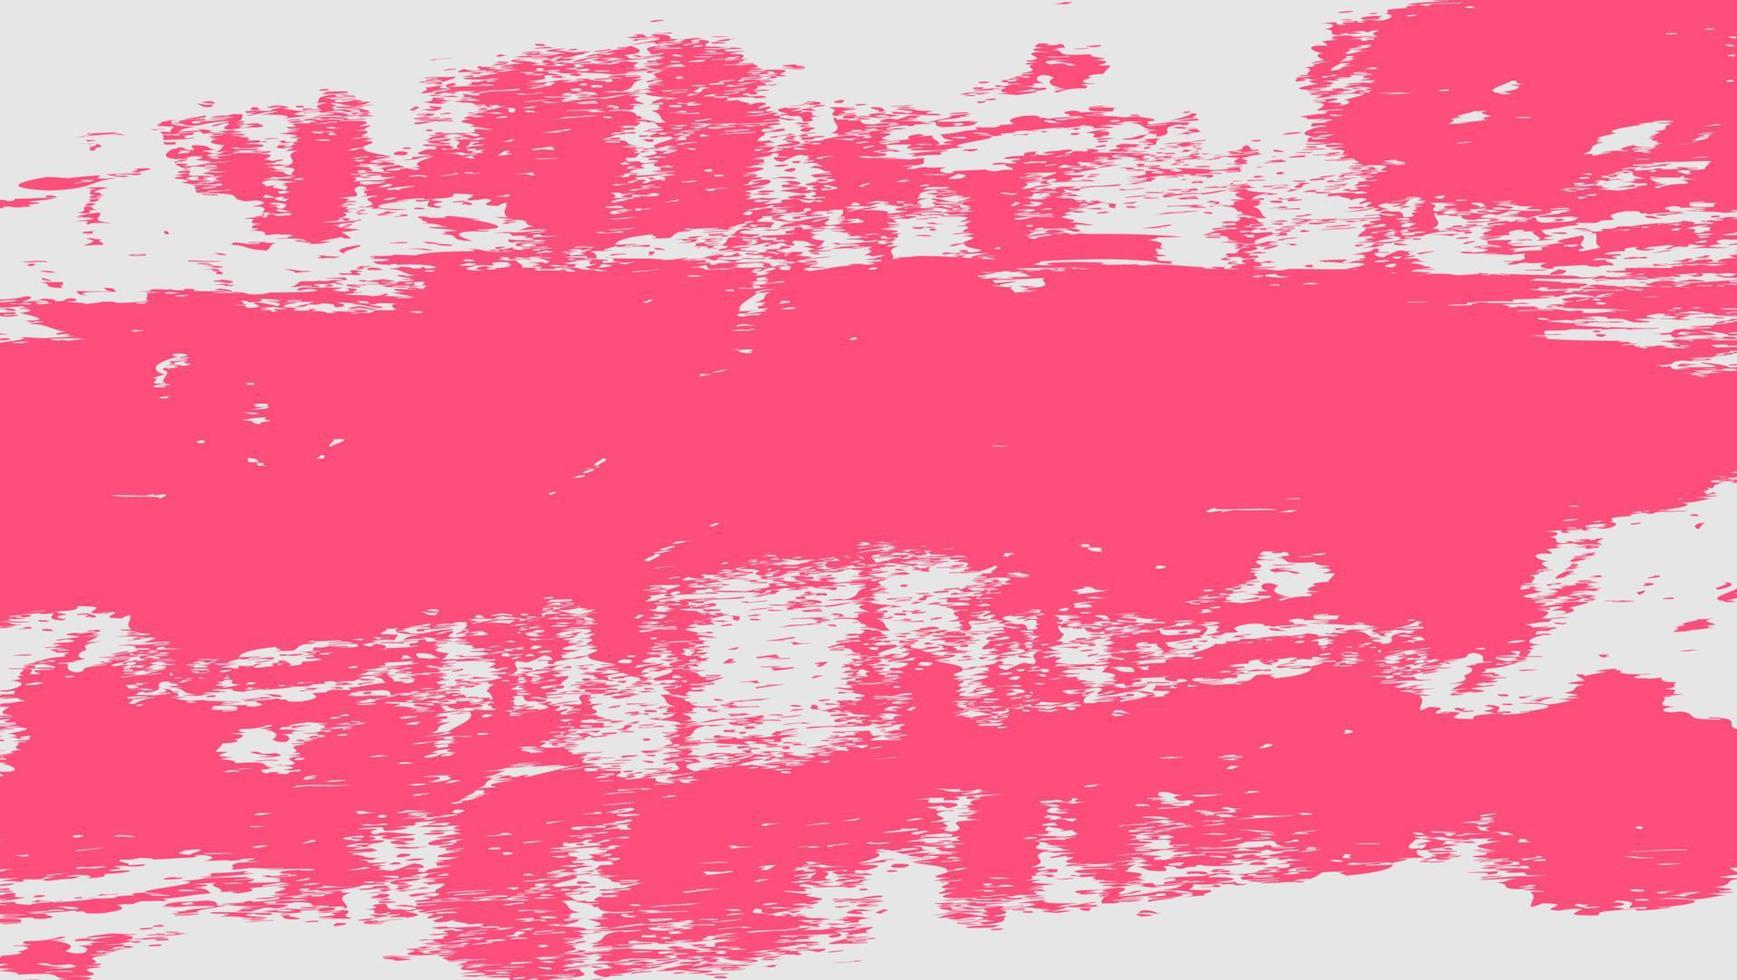 Abstract Pink White Frame Grunge Texture Background Design vector